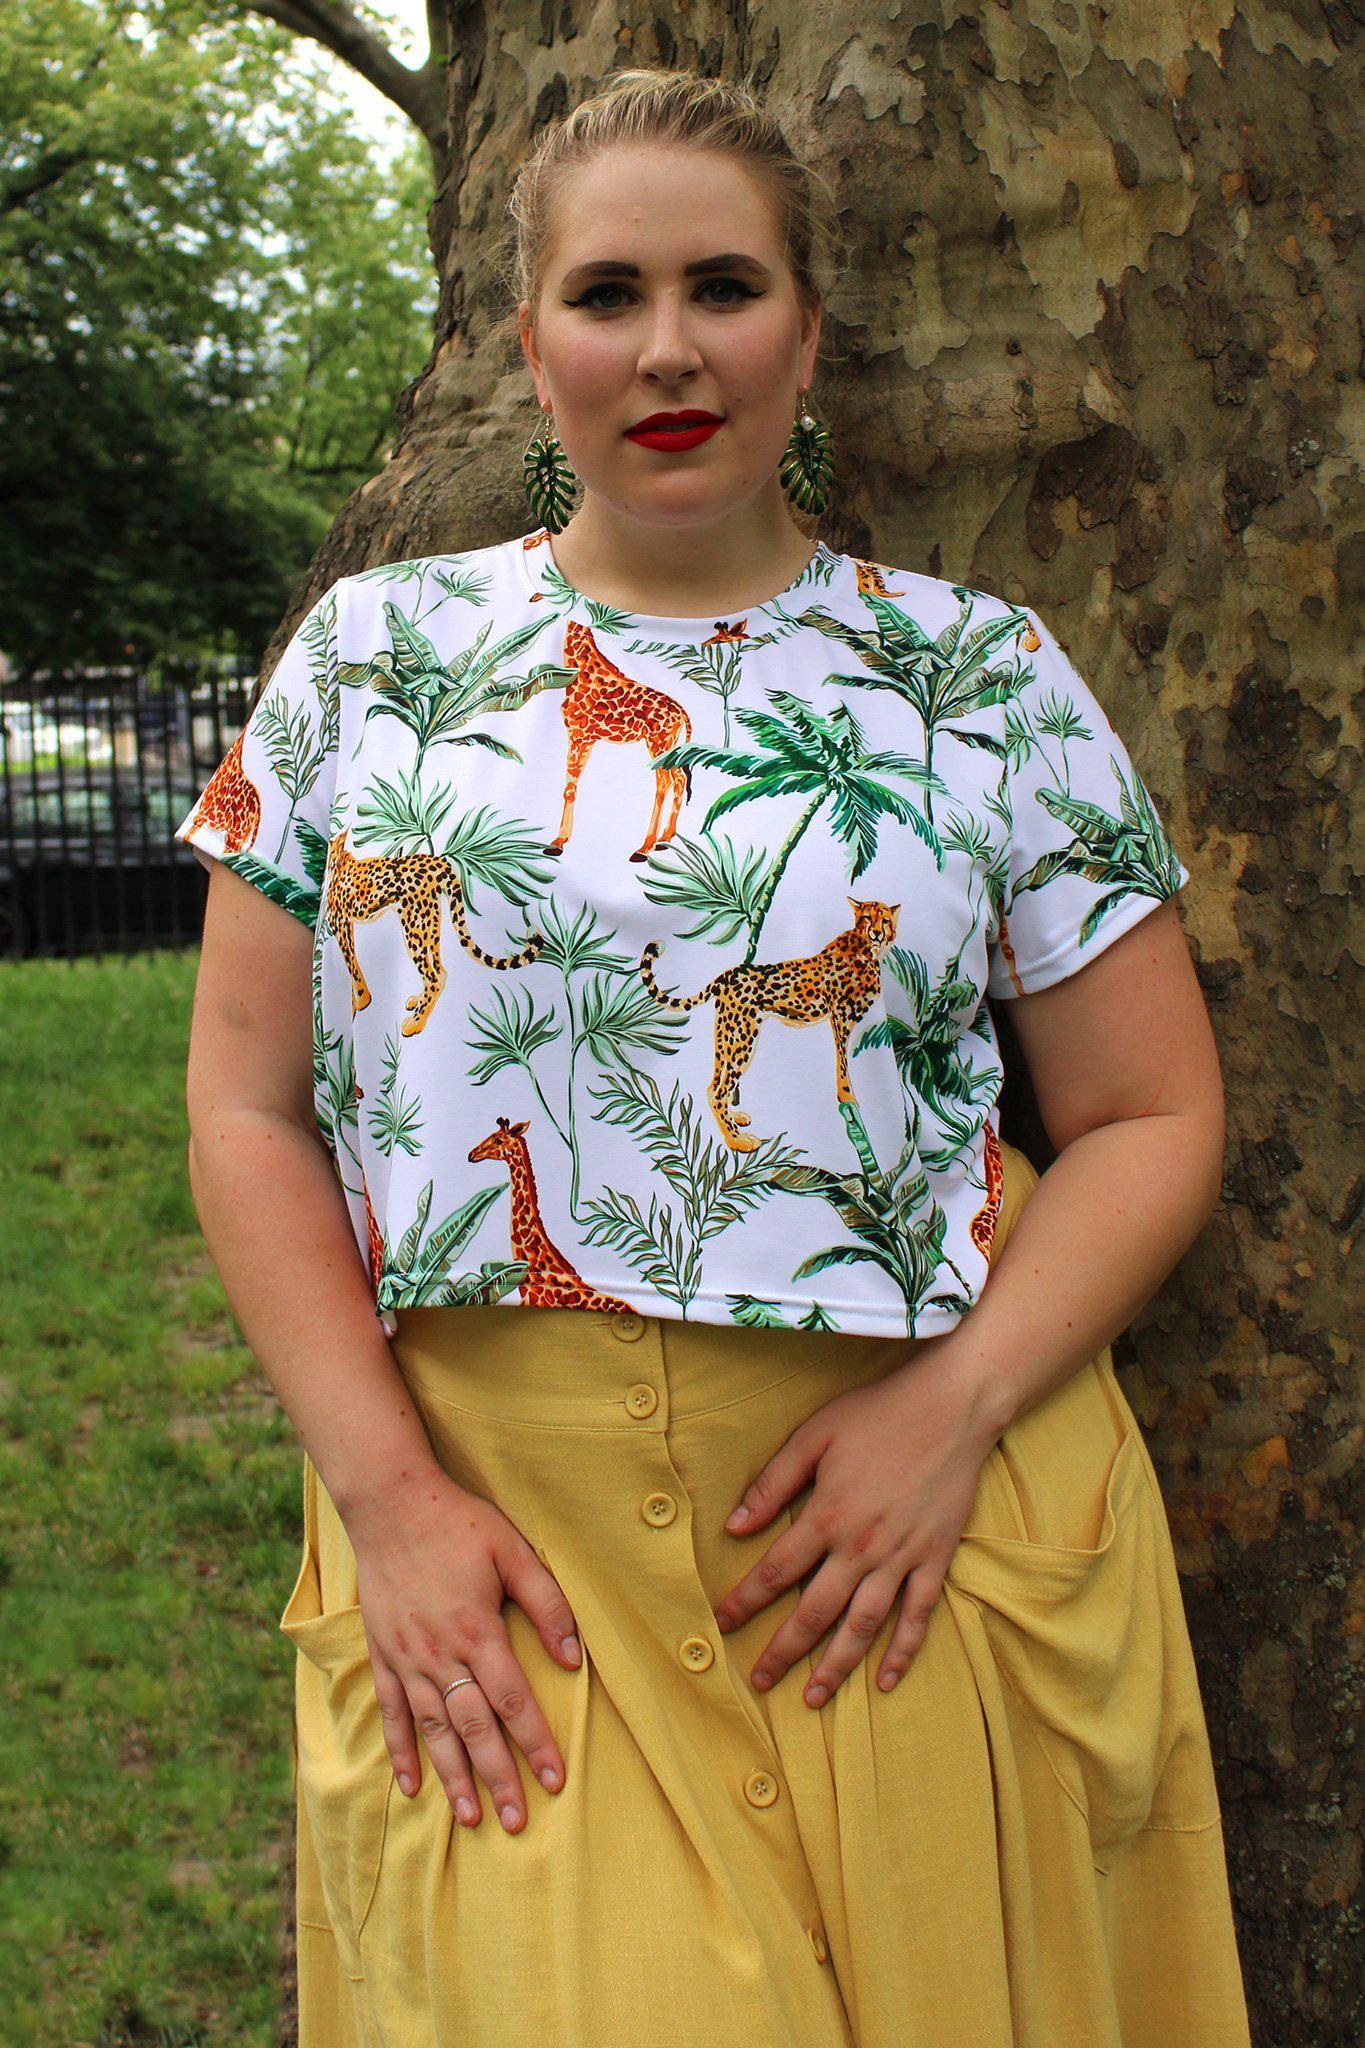 Model outside wearing jungle print crop tee with yellow skirt